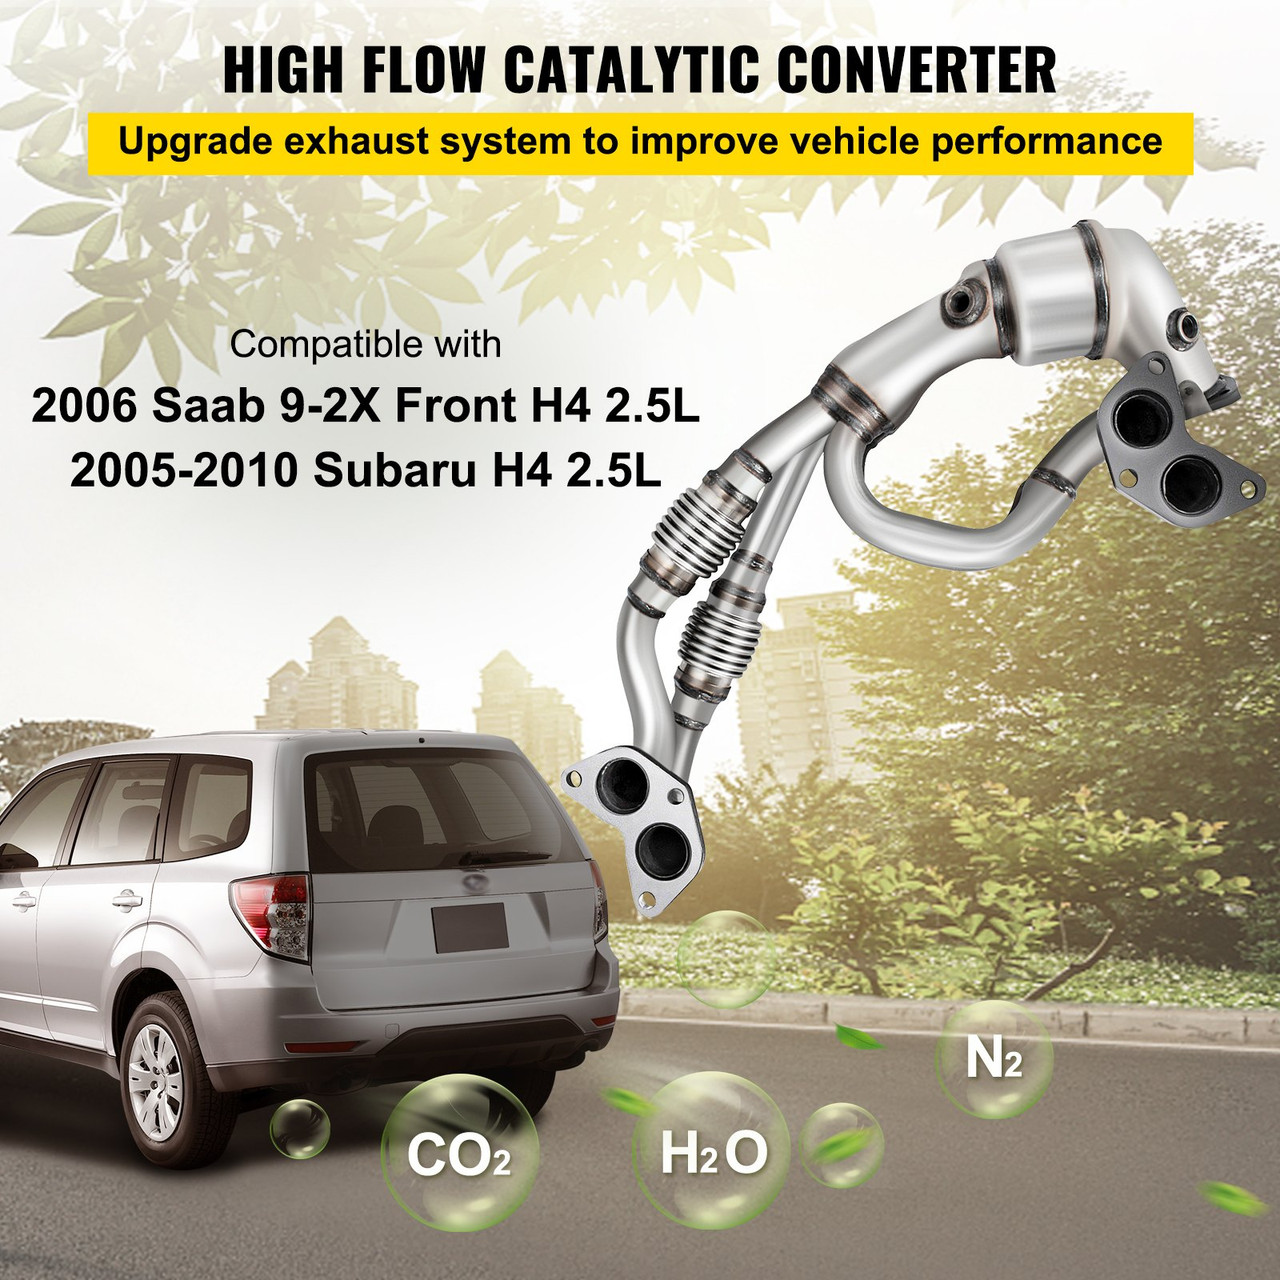 Catalytic Converter Direct Fit Front Exhaust Manifold High Flow Catalytic Converter Compatible with Subaru Impreza, Legacy, Forester, Outback, 06-12, 4 Cyl 2.5L Except Turbo W/Gasket Kit